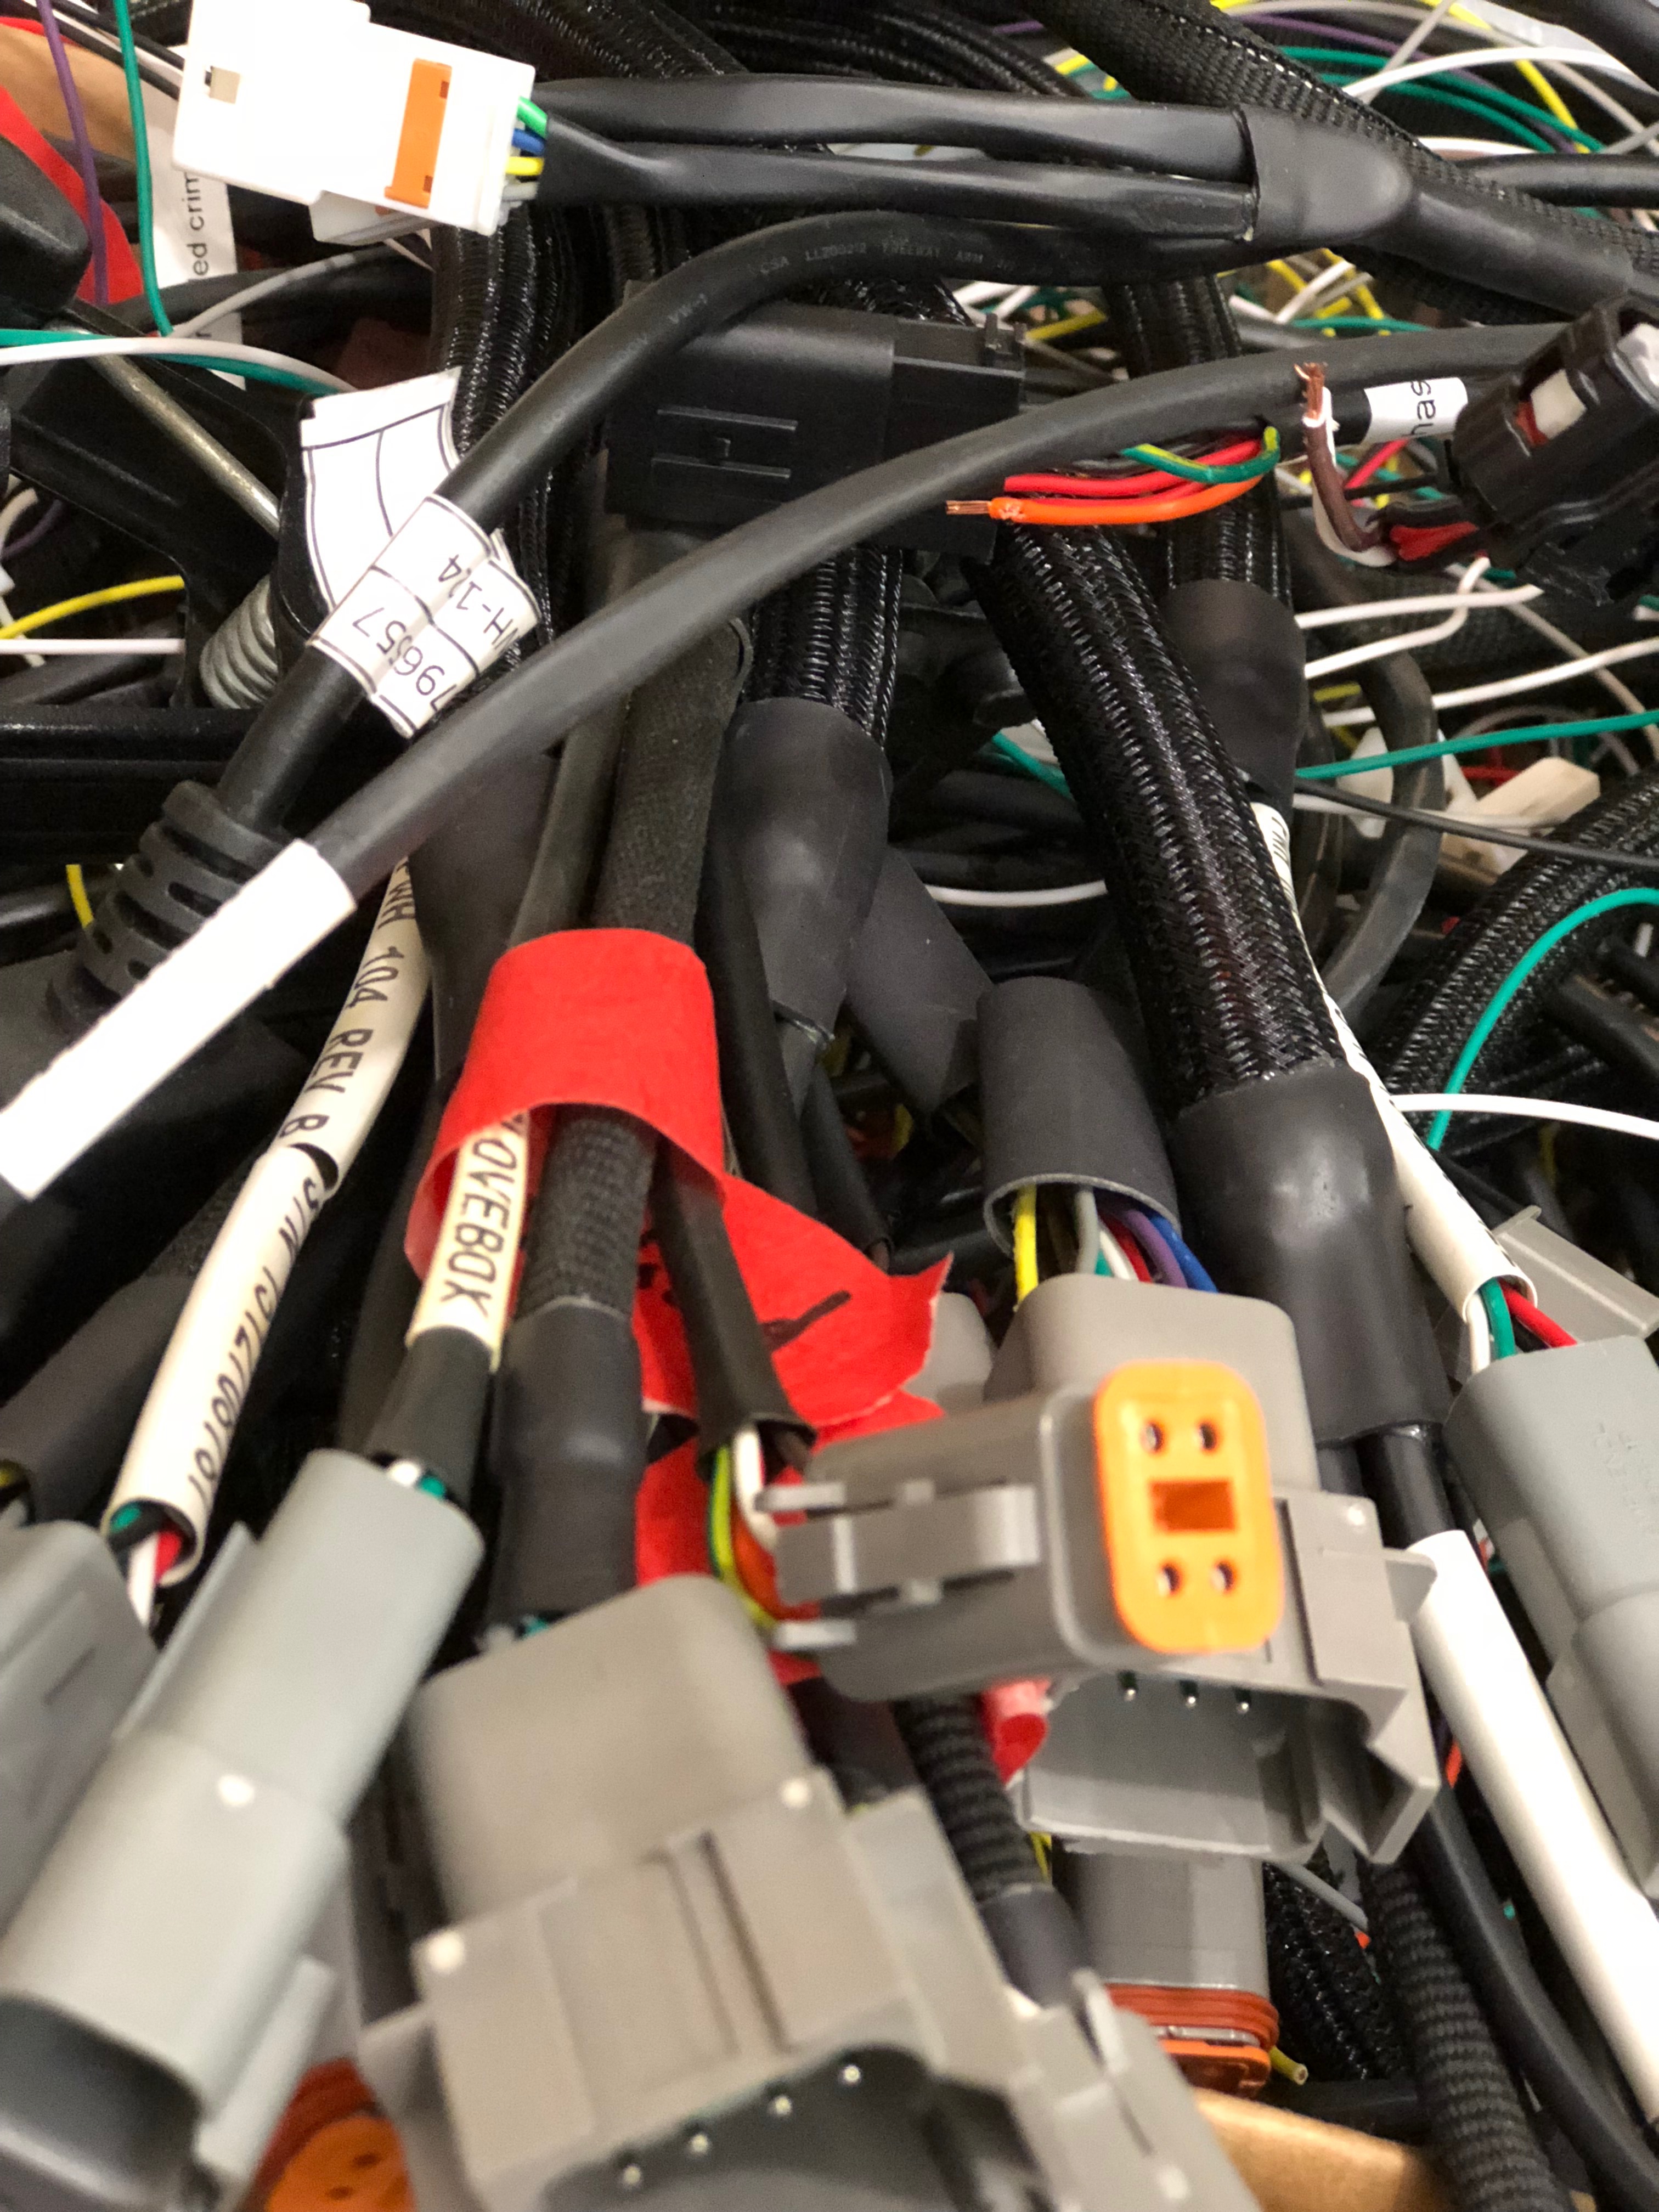 Ventilator machine wiring harness.  Emergency Wiring connector production.  We can make wiring for human life support ventilator machines.   Contain the spread of the COVID-19 virus (Coronavirus) in the United States.